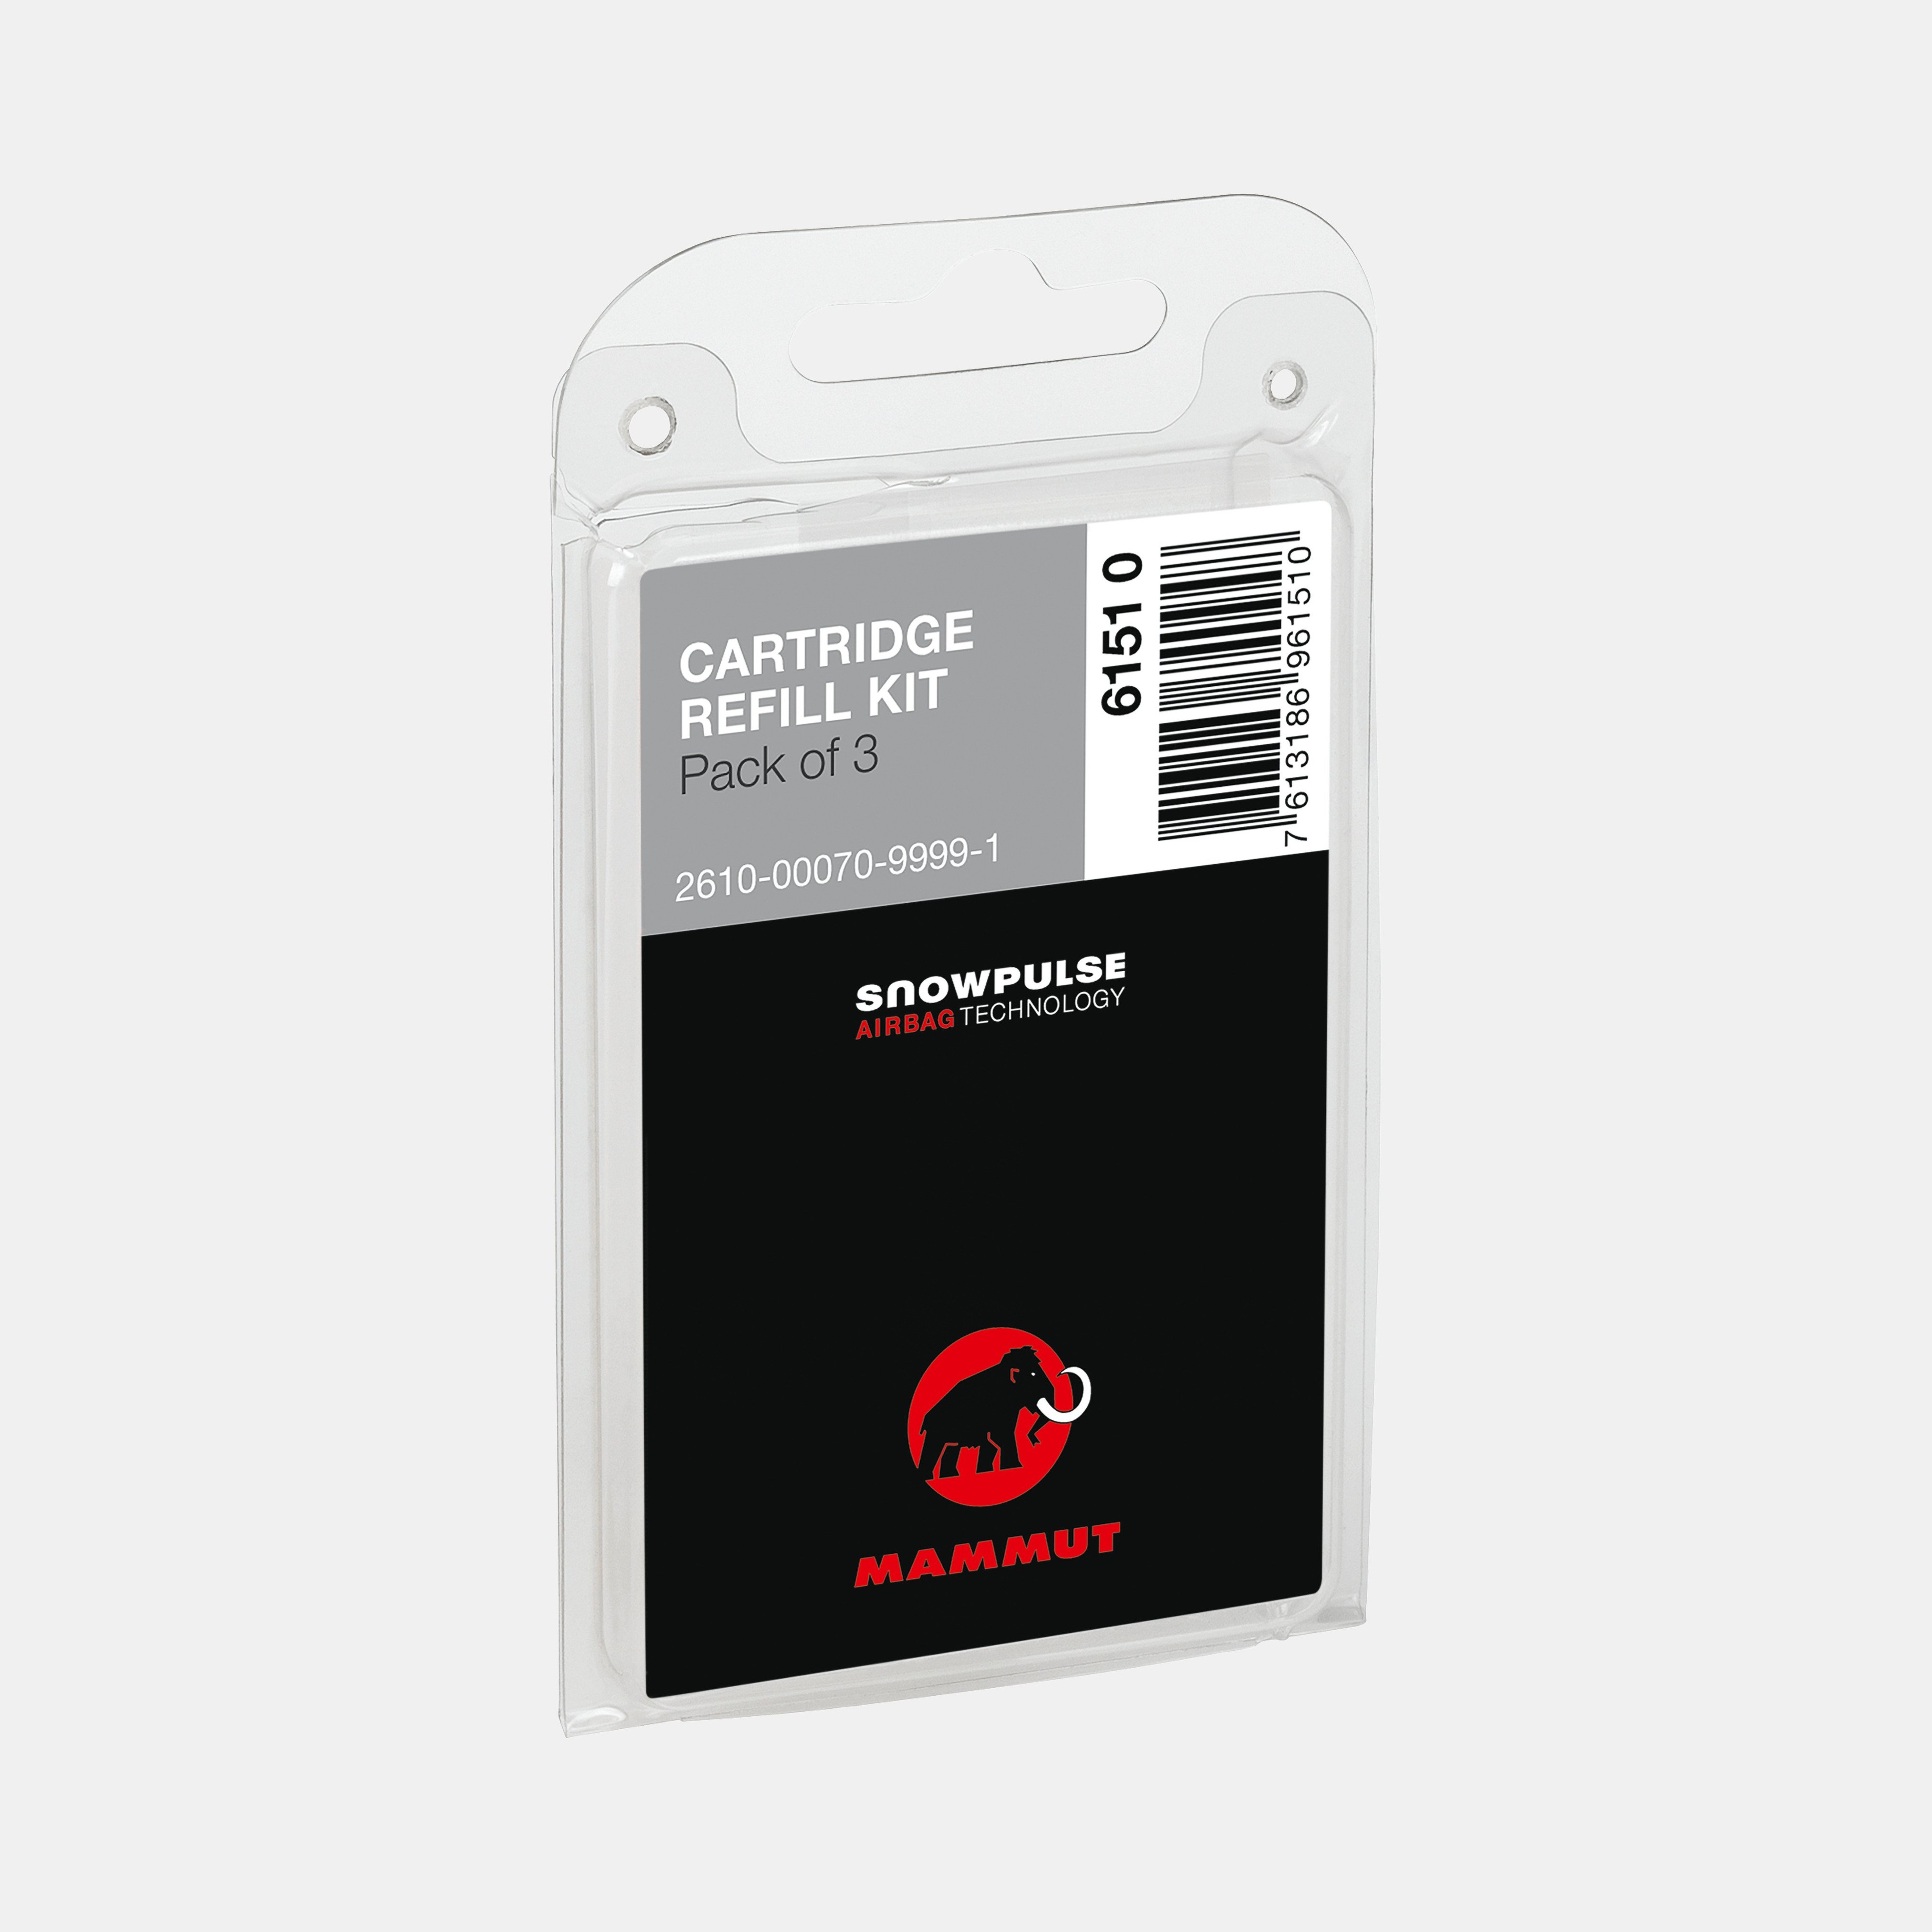 Cartridge Refill Kit (Pack of 3) product image